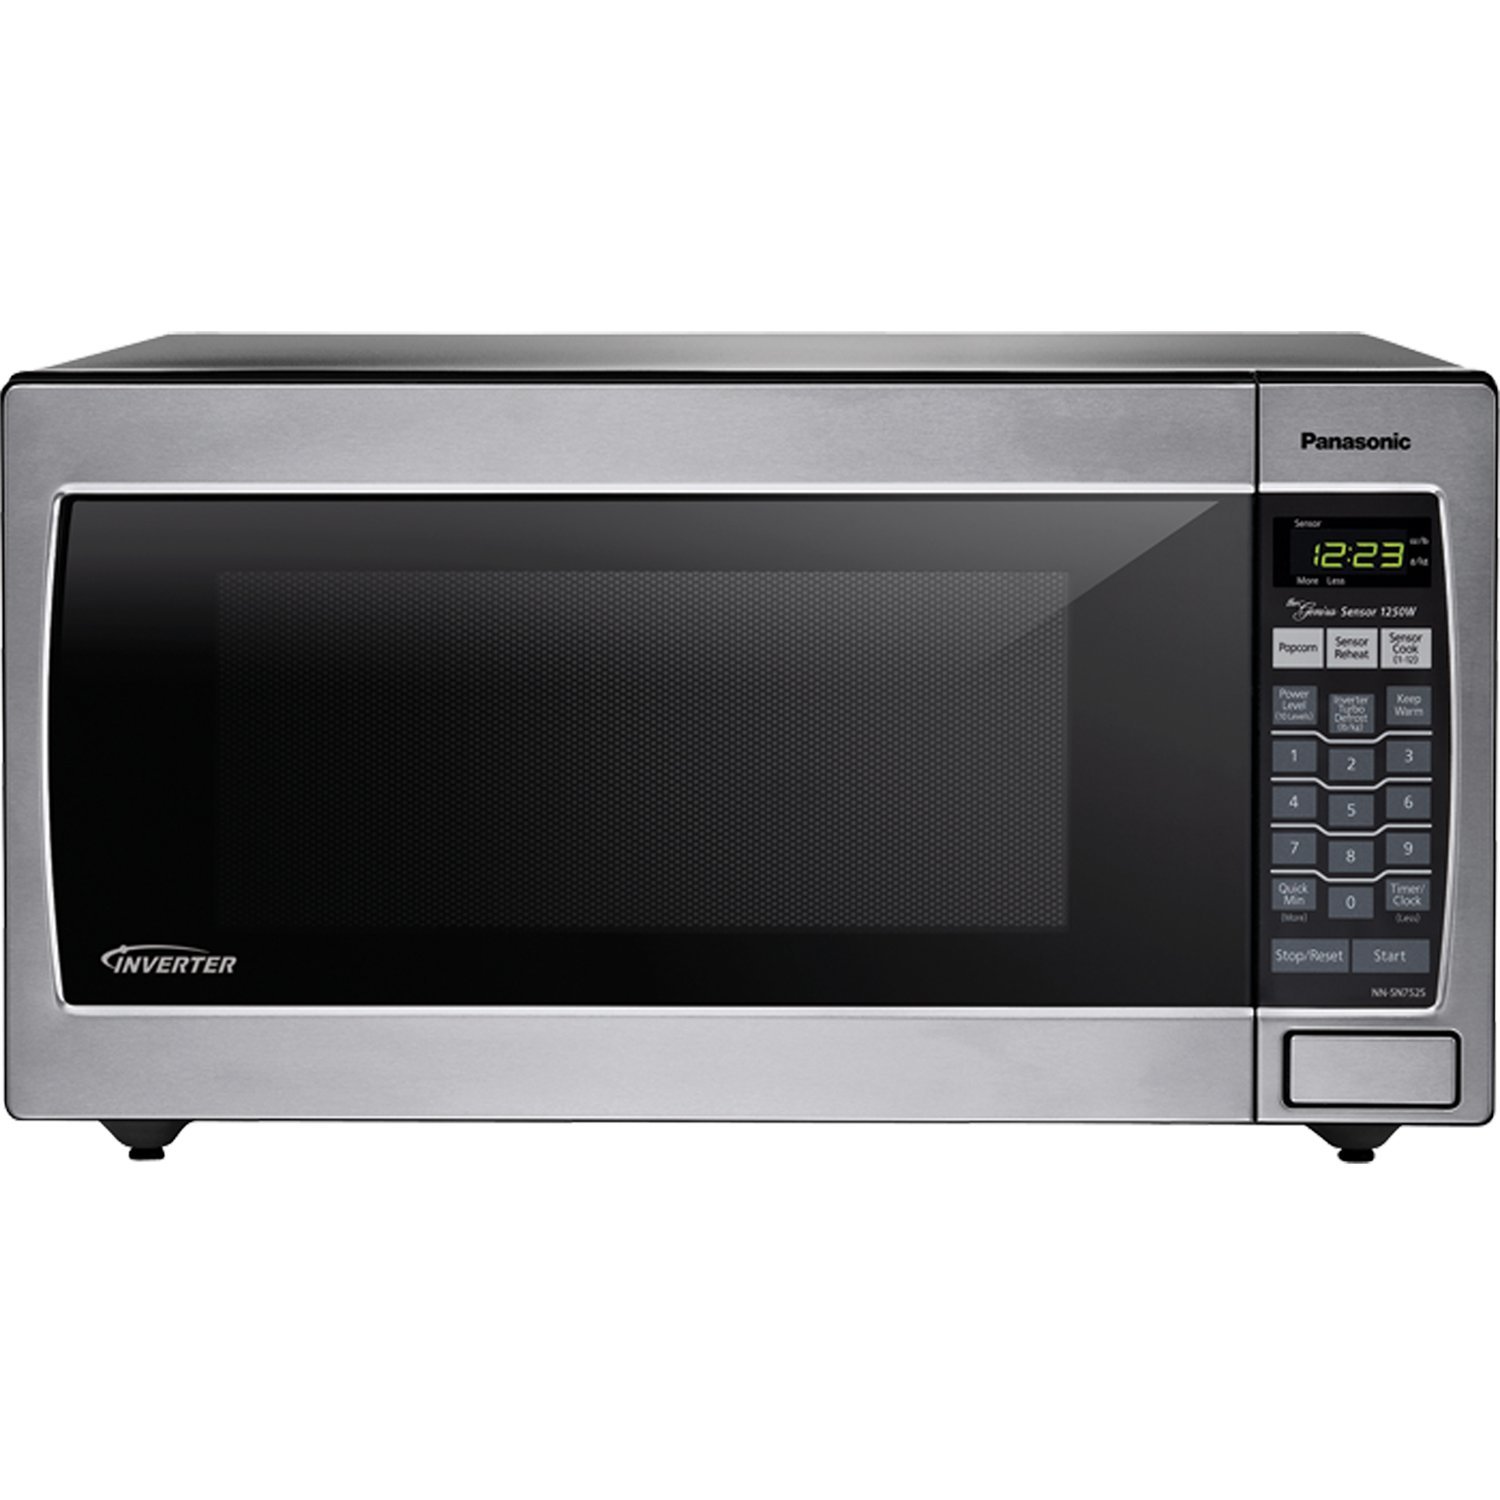 Panasonic NN-SN752S Stainless 1250W 1.6 Cu. Ft. Countertop Microwave Oven with Inverter Technology